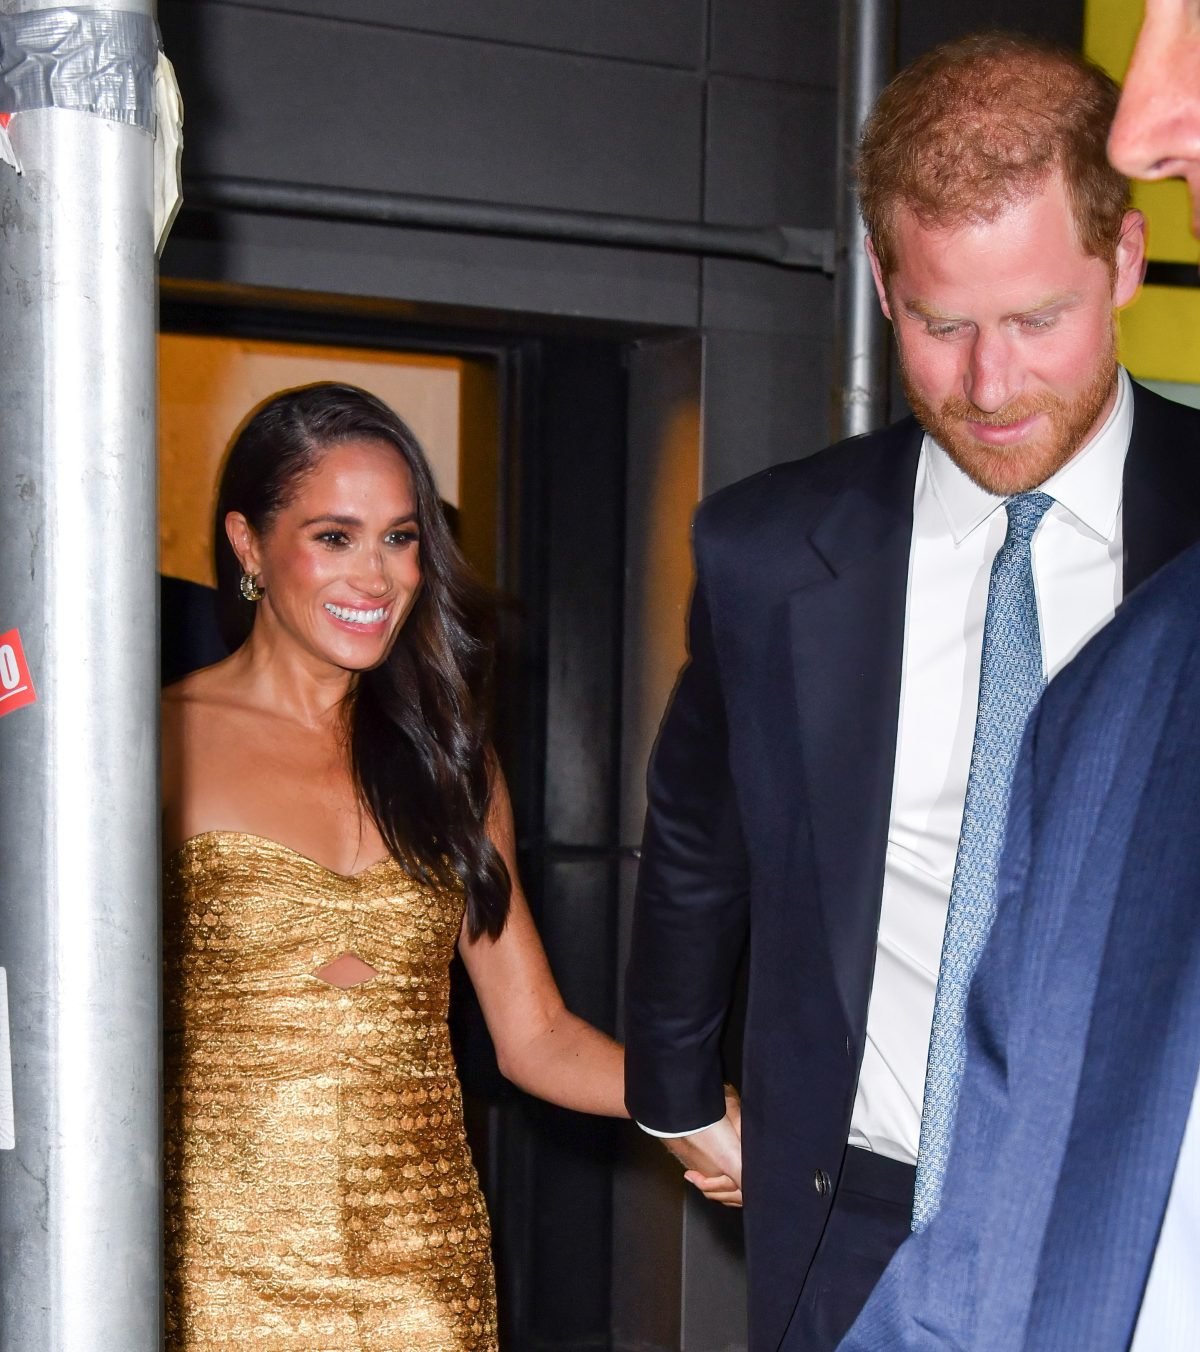 Meghan Markle and Prince Harry leave The Ziegfeld Theatre in New York City after 2023 Women of Vision Awards